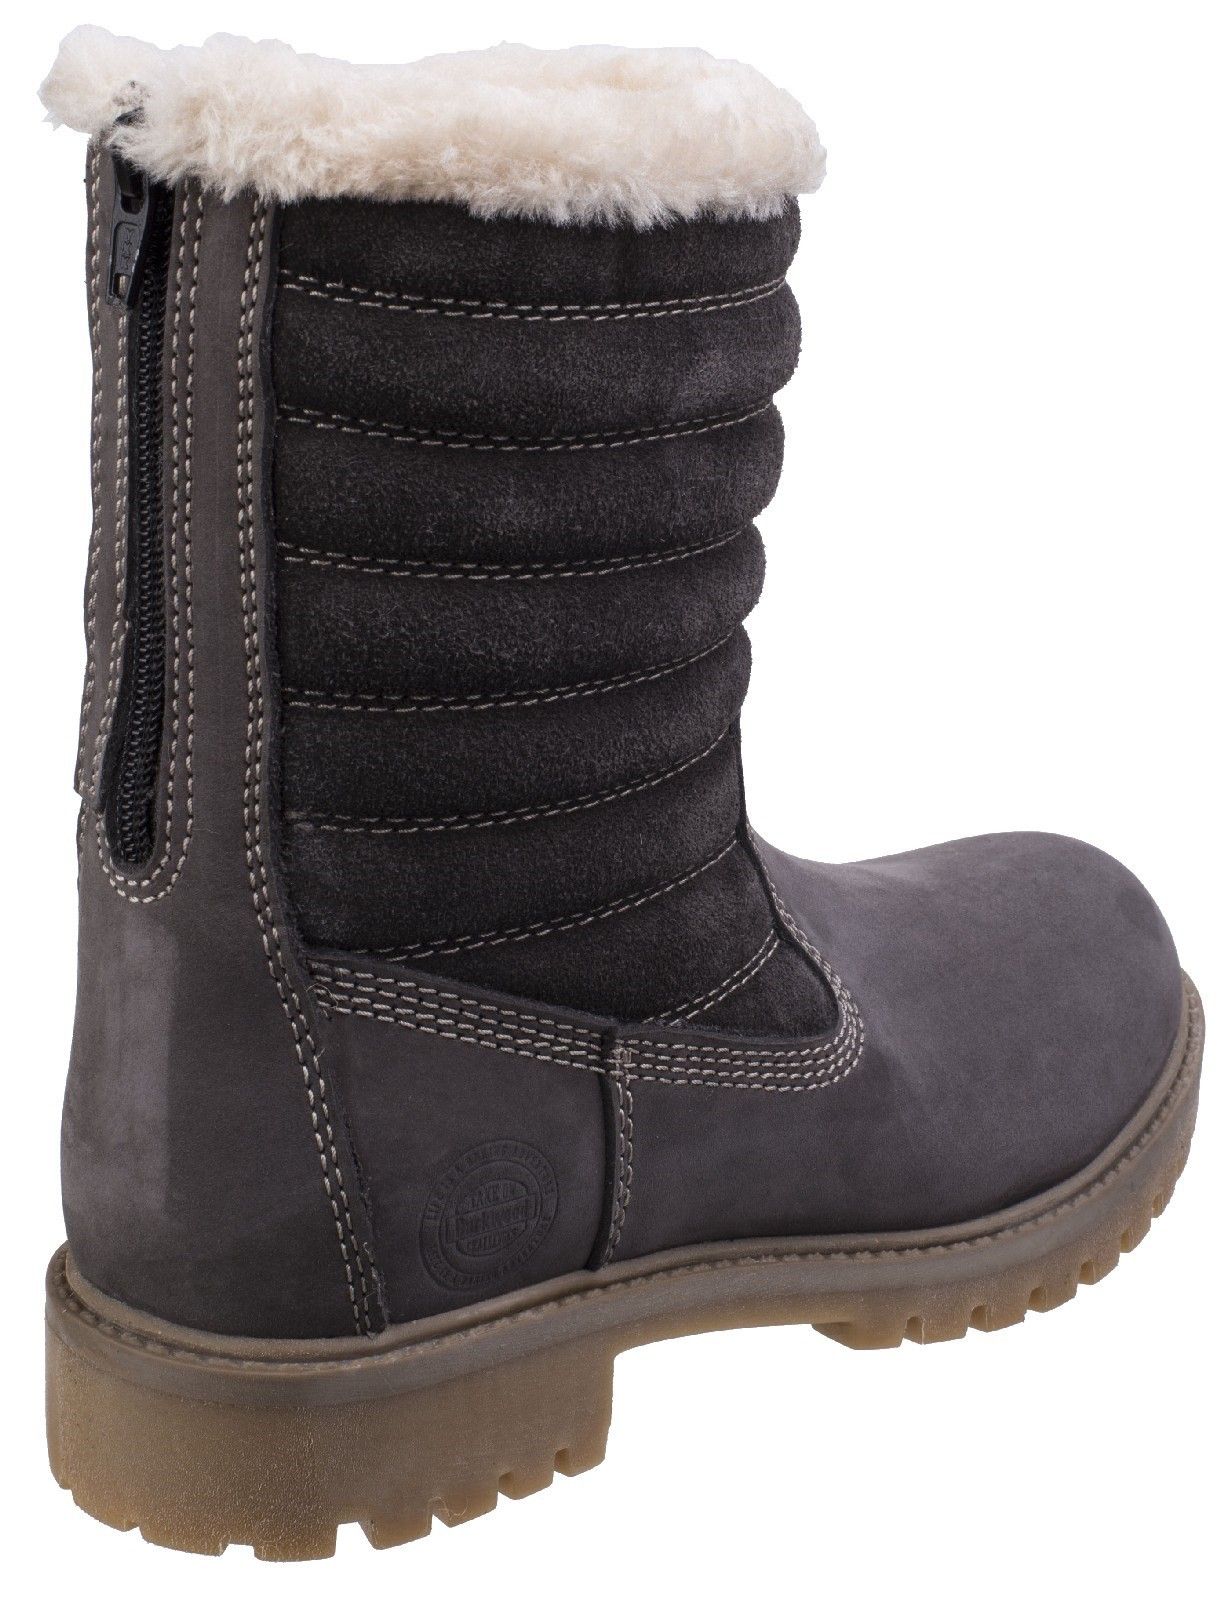 Darkwood boots with classy design, featuring water-resistant membrane. Perfect for hiking and cold weather conditions. Womens water-resistant casual boot. 
Artificial-Fur. 
Ideal for autumn and winter. 
Water-resistant genuine leather. 
Good level of puncture resistance against brambles.